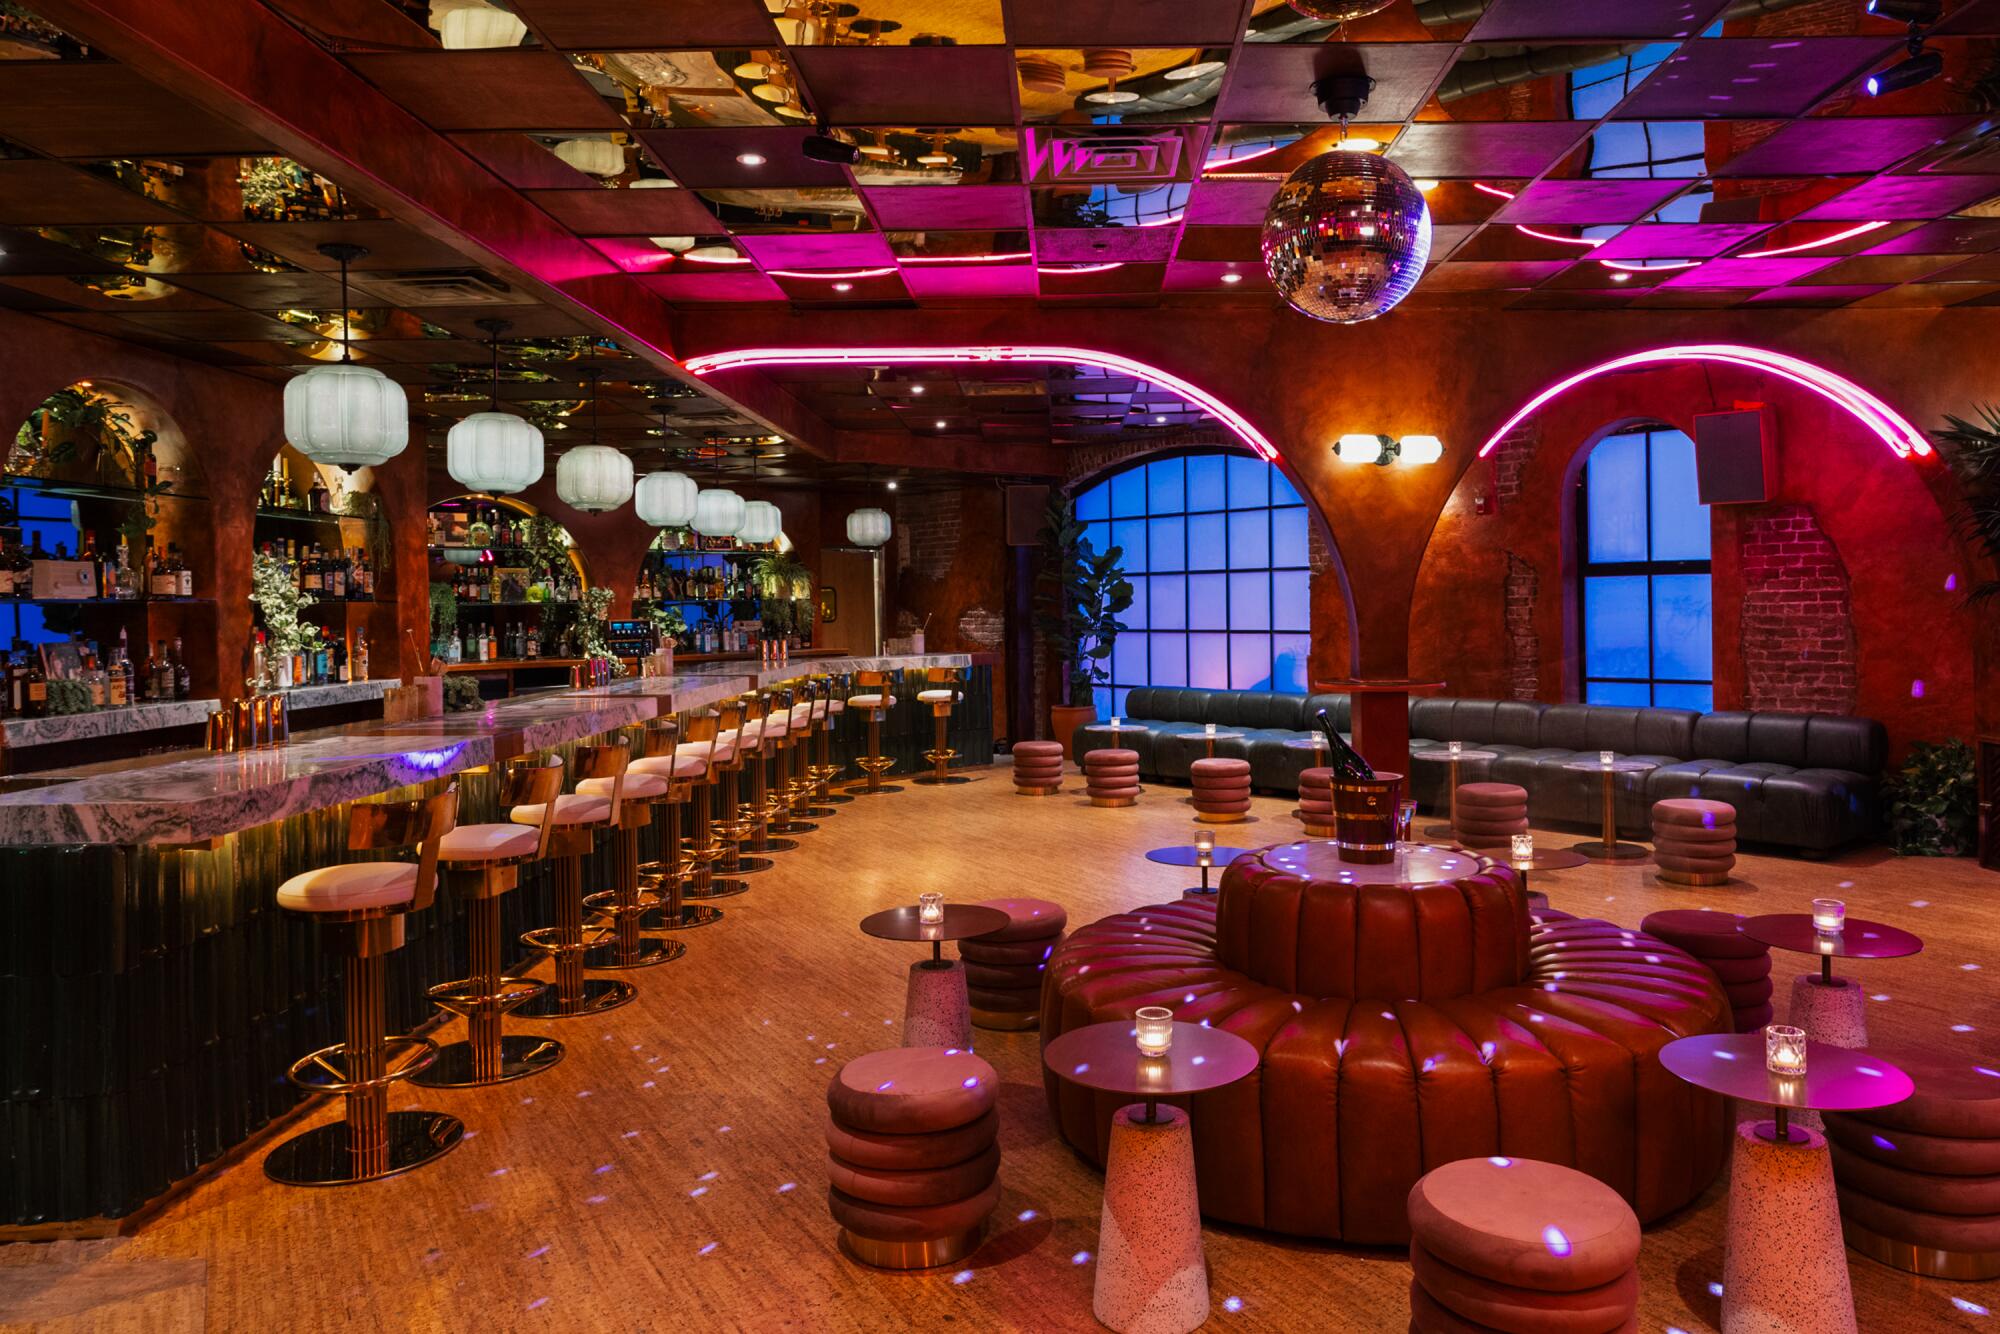 A room with a long bar with barstools and assorted other seating under pink neon